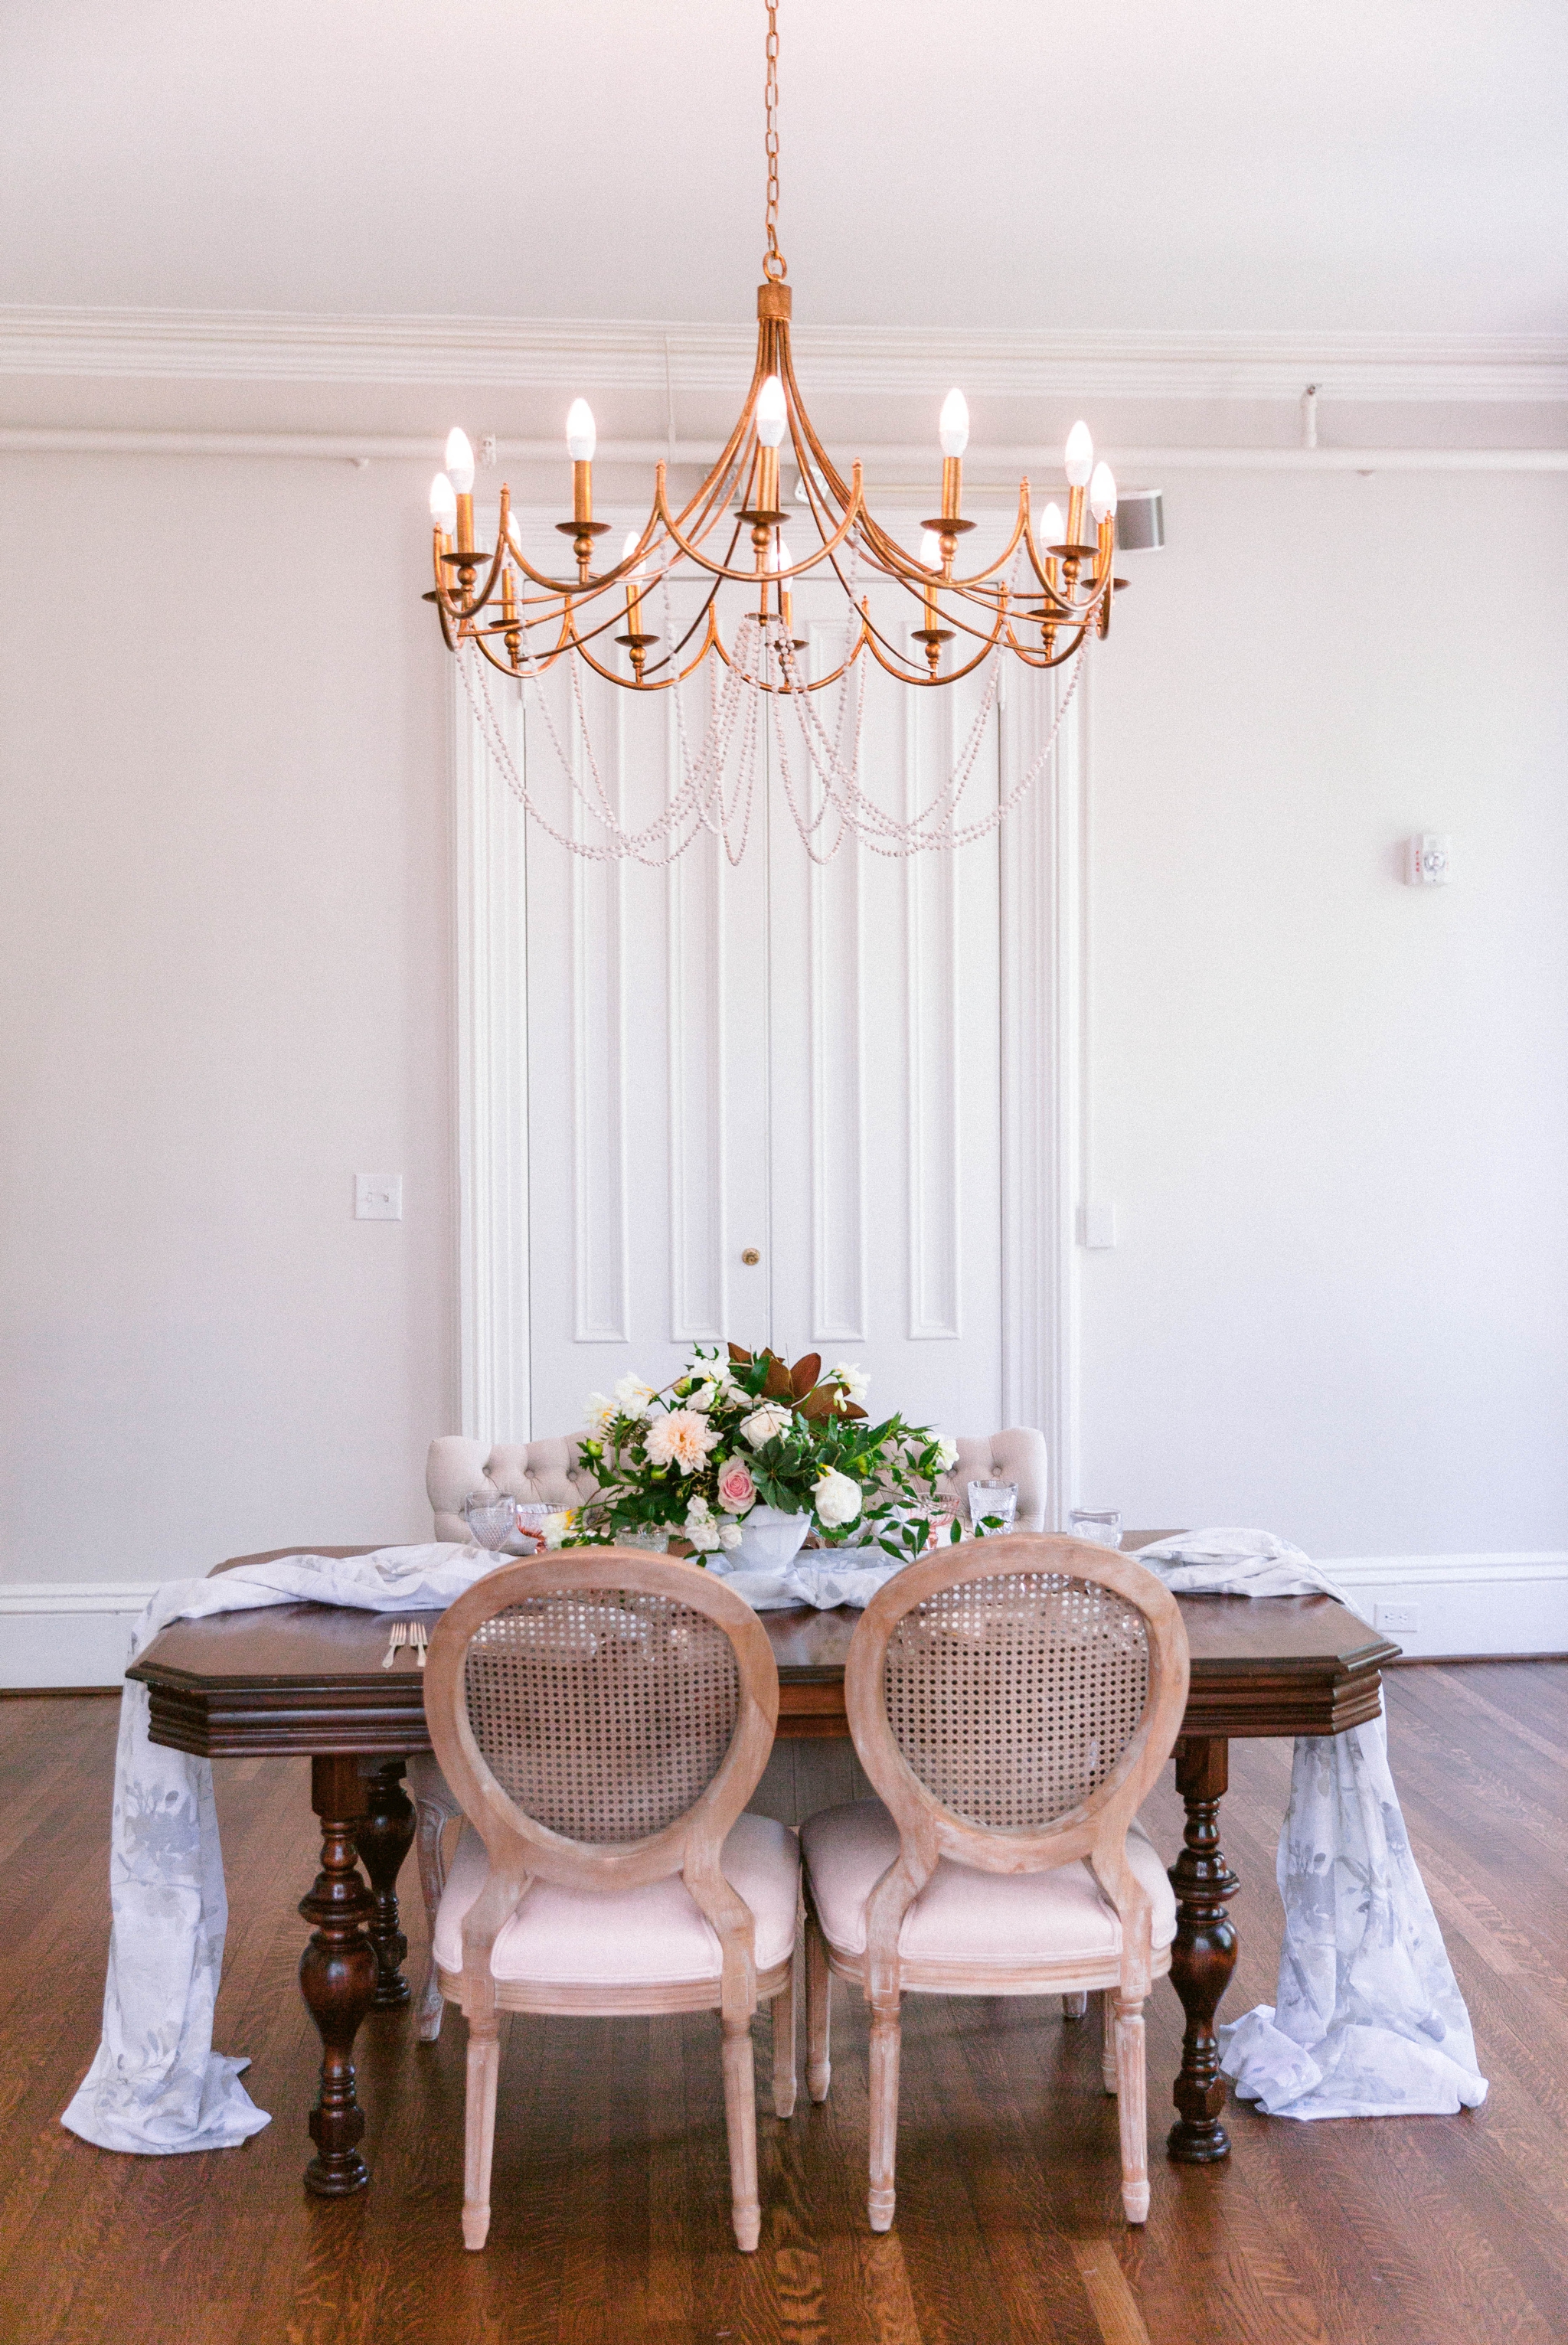  natural light dining room inspiration in an all white estate - blue and pink hues with lots of greenery - reception dinner decoration inspiration - honolulu oahu hawaii wedding photographer - johanna dye photography 